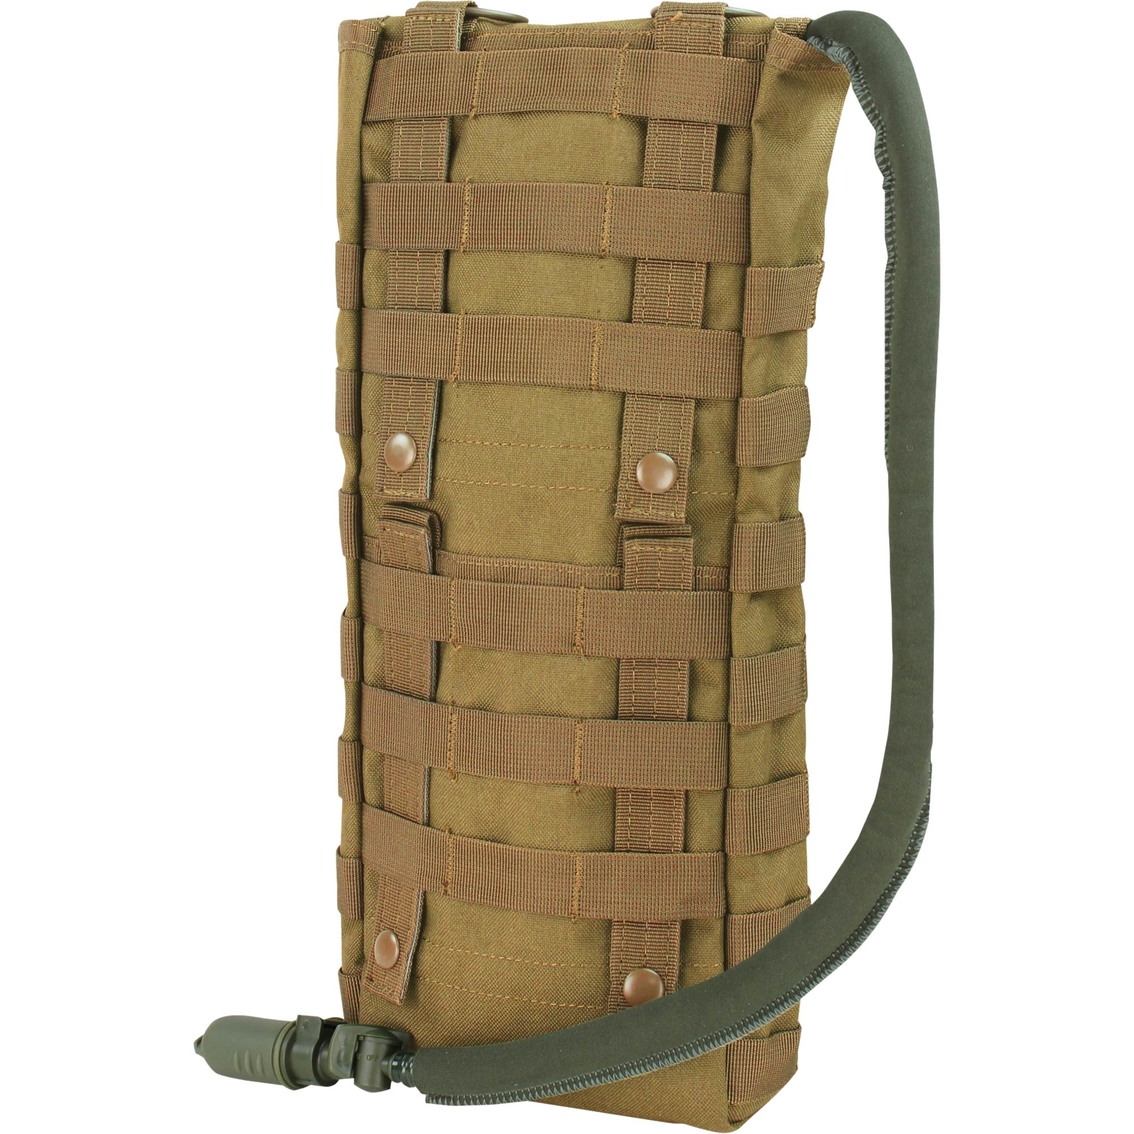 Condor Hydration Carrier HCB W/ 3L Reservoir Coyote - Image 2 of 2